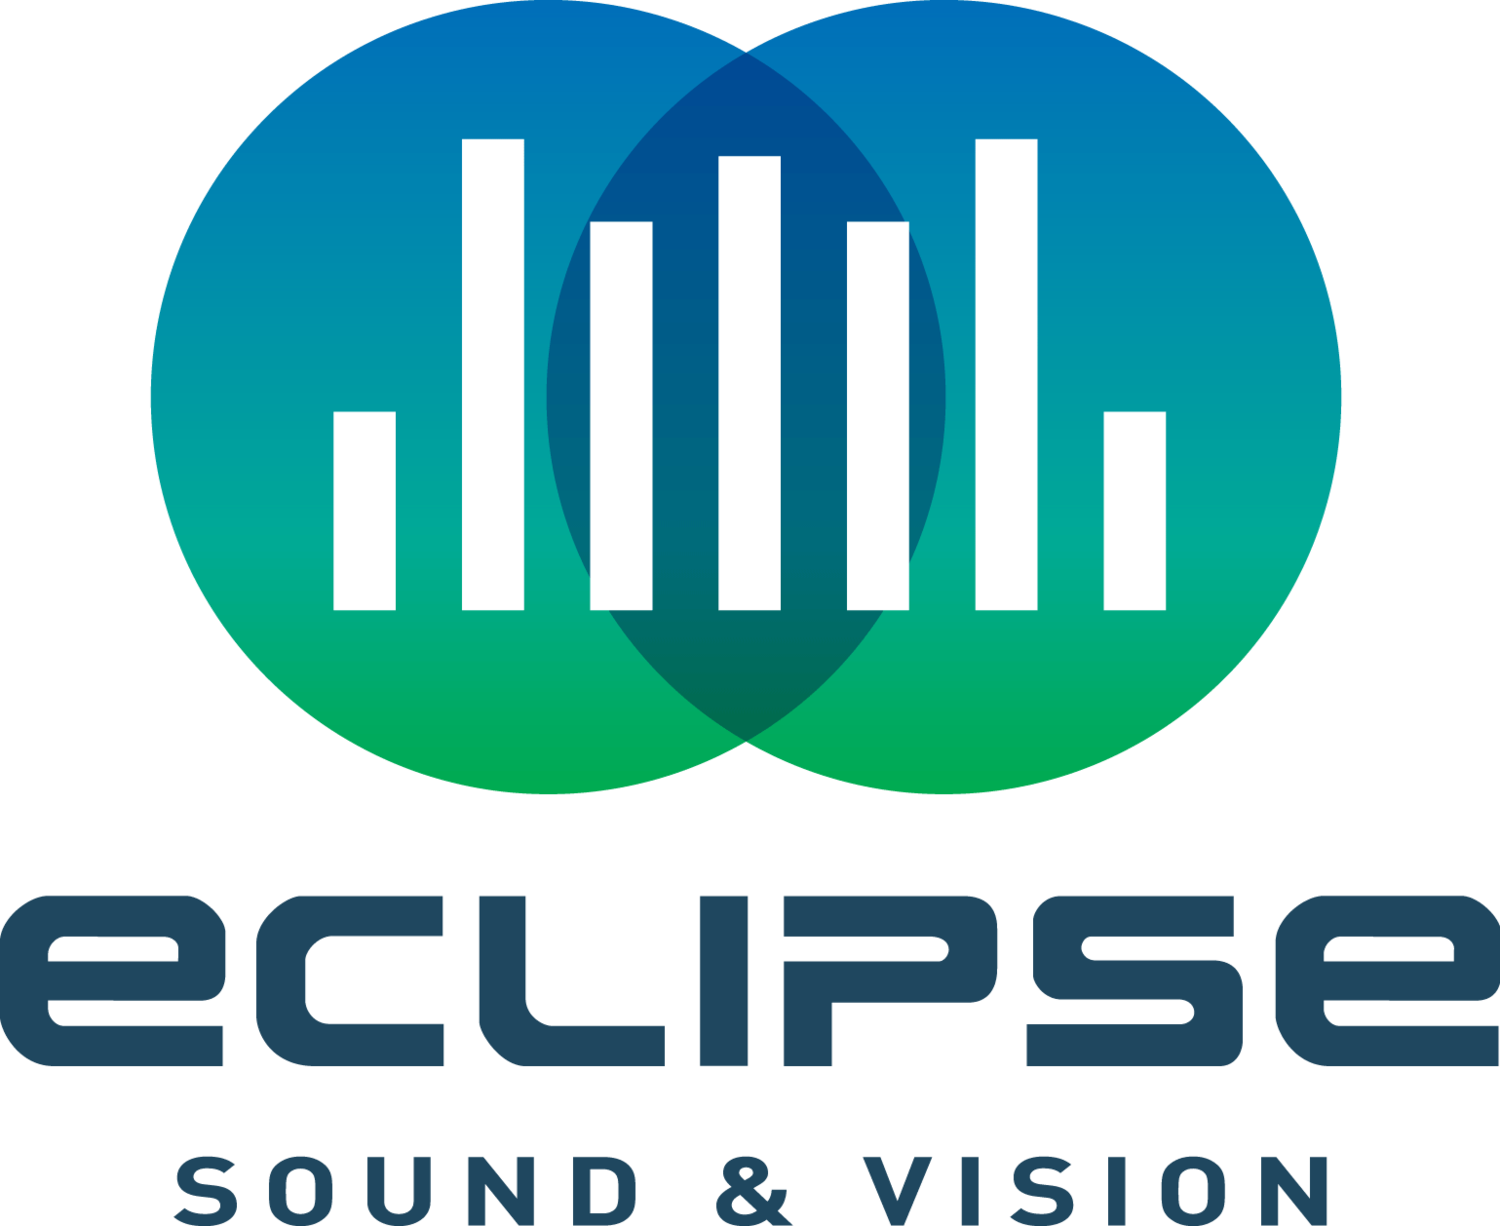 Eclipse Sound and Vision